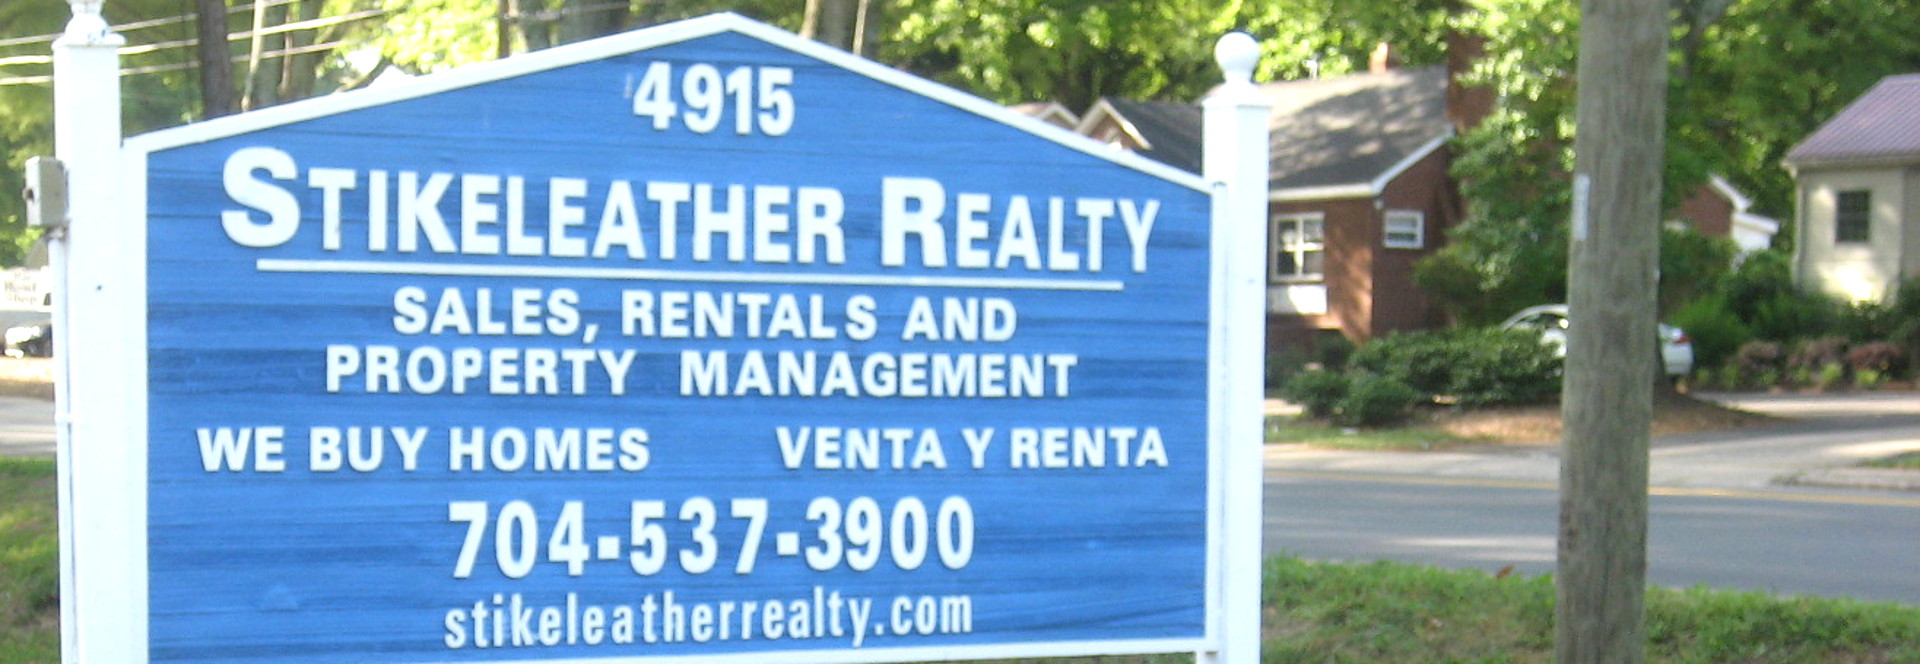 Stikeleather-Realty-Sign-2-1920x664b